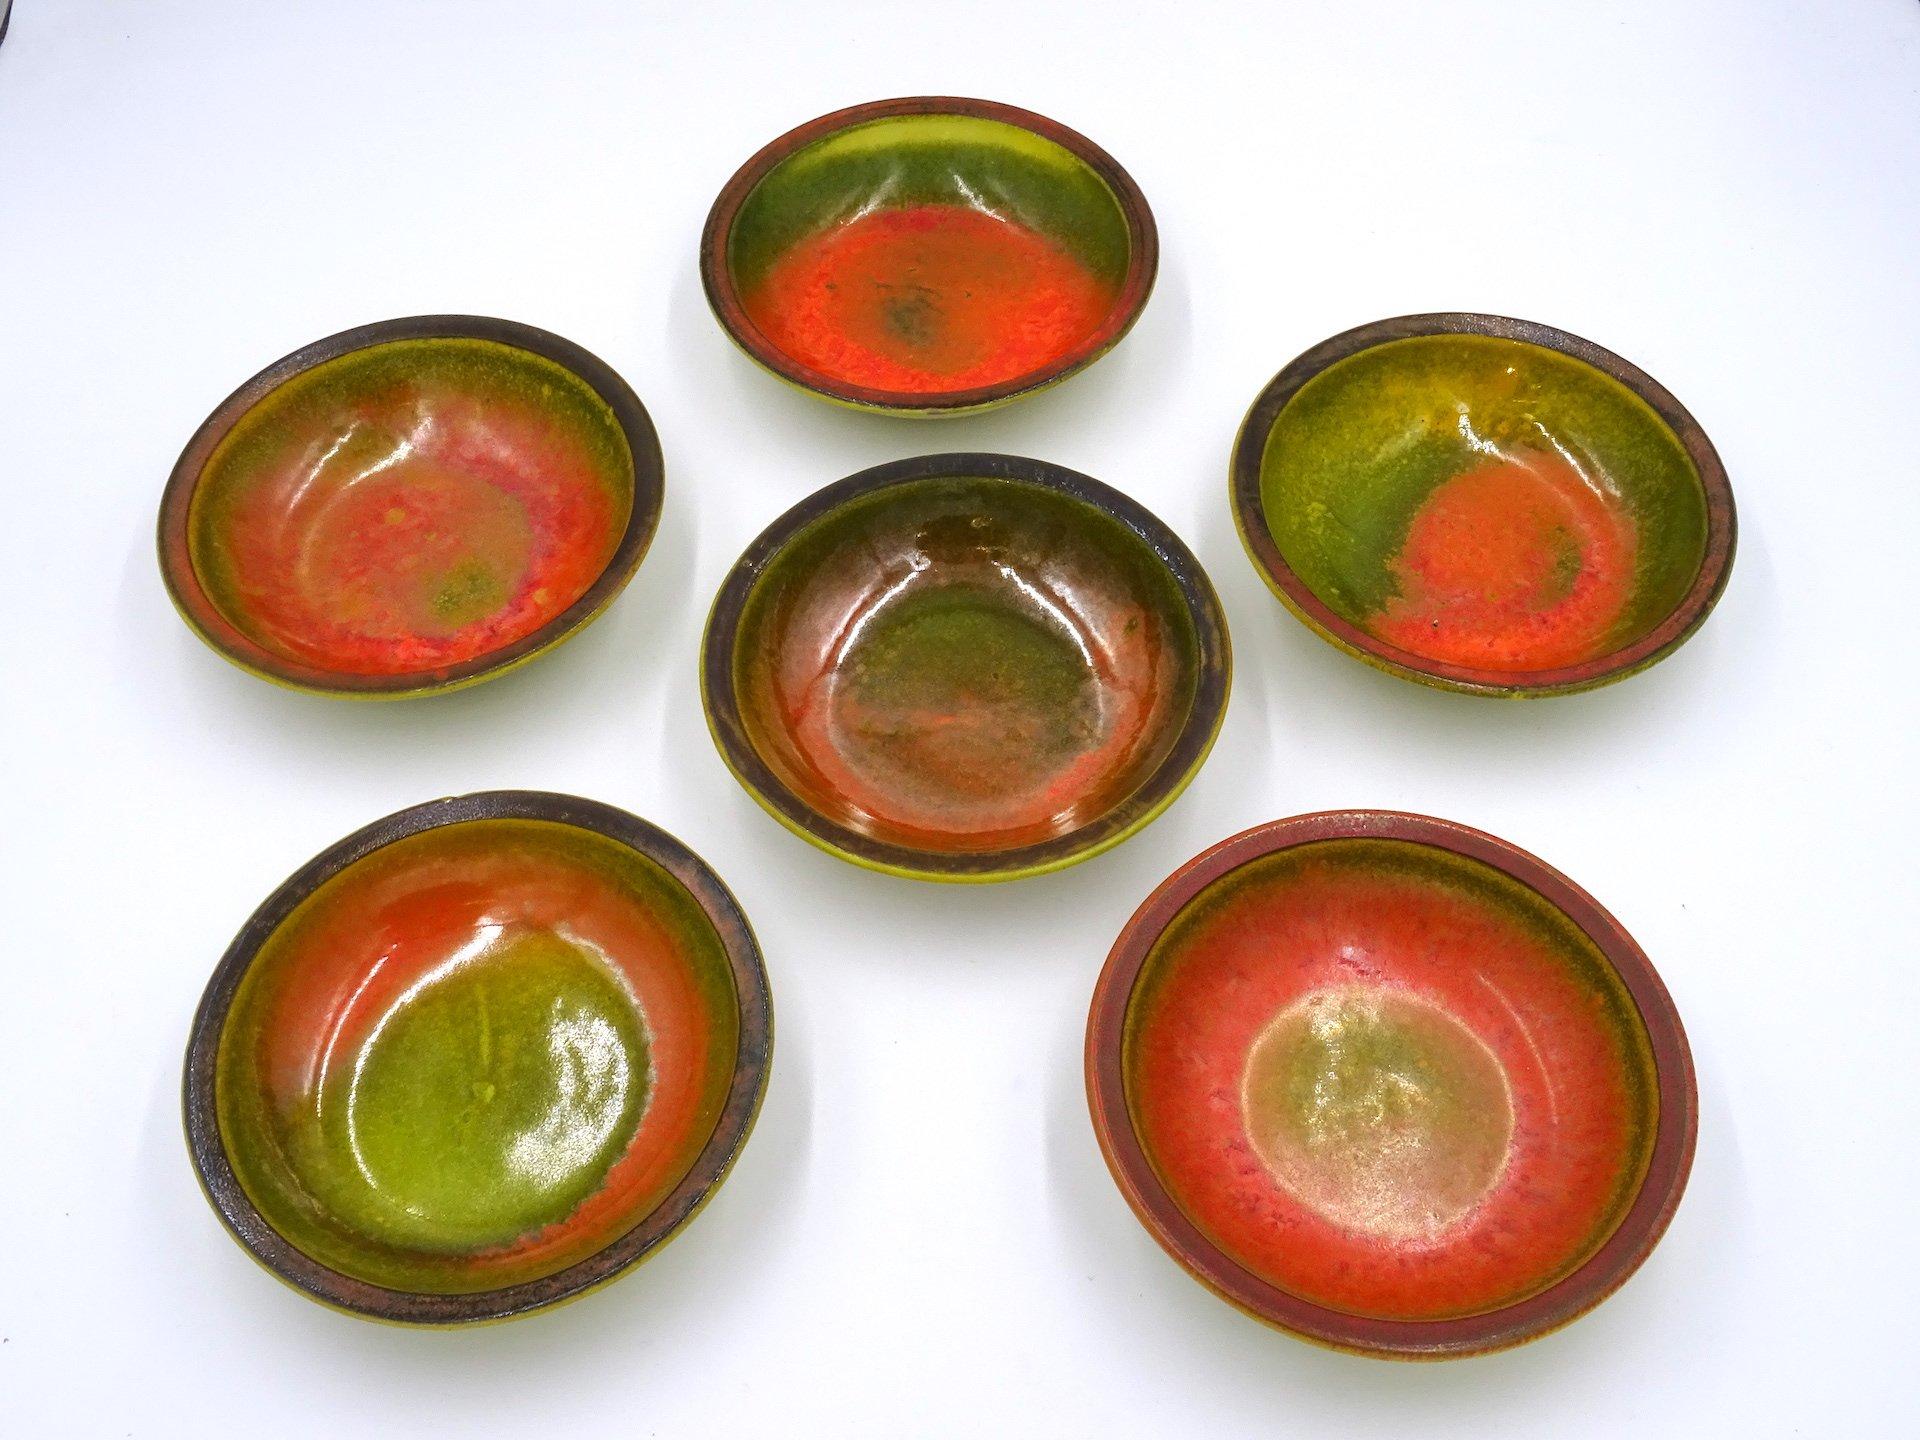 Set consisting of seven bowls made of polychrome glazed ceramic dating back to the seventies by the Italian artist Alessio TASCA:

- six small bowls characterized by warm colors including orange, red, green, brown, magenta, each piece is unique